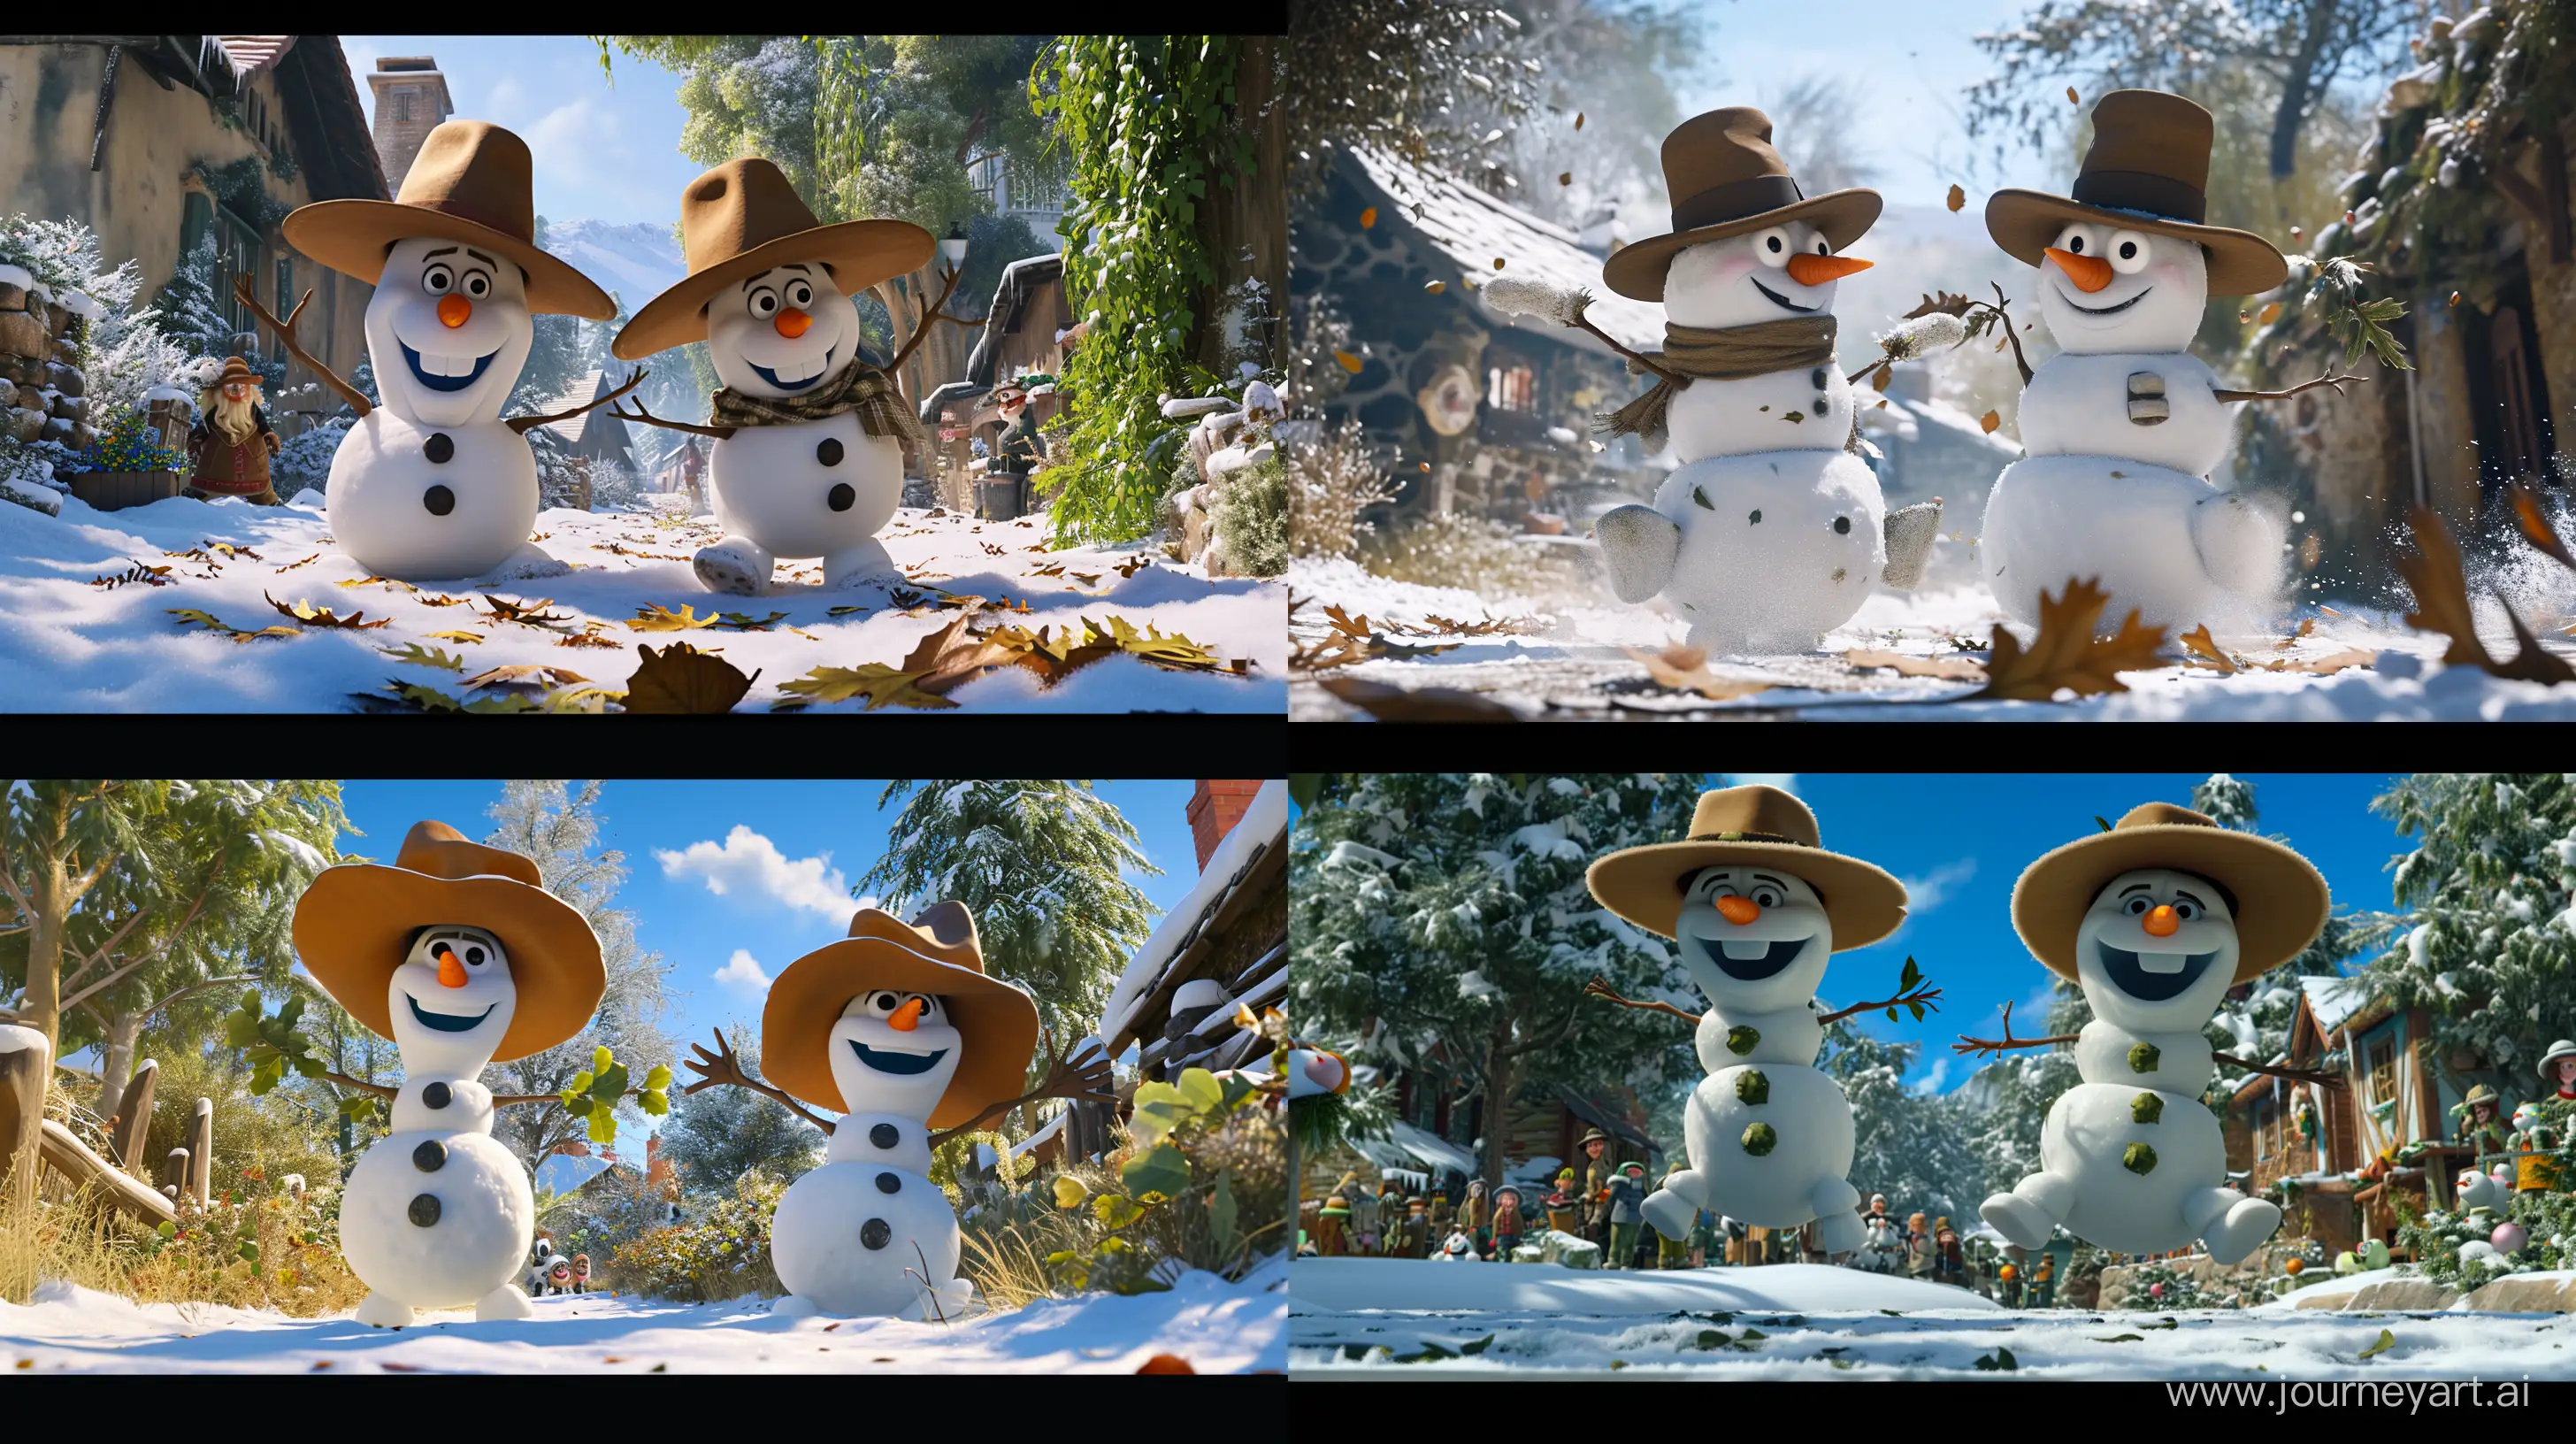 Snowmen-Robert-the-Great-and-Tiny-Tim-in-Magical-Village-Action